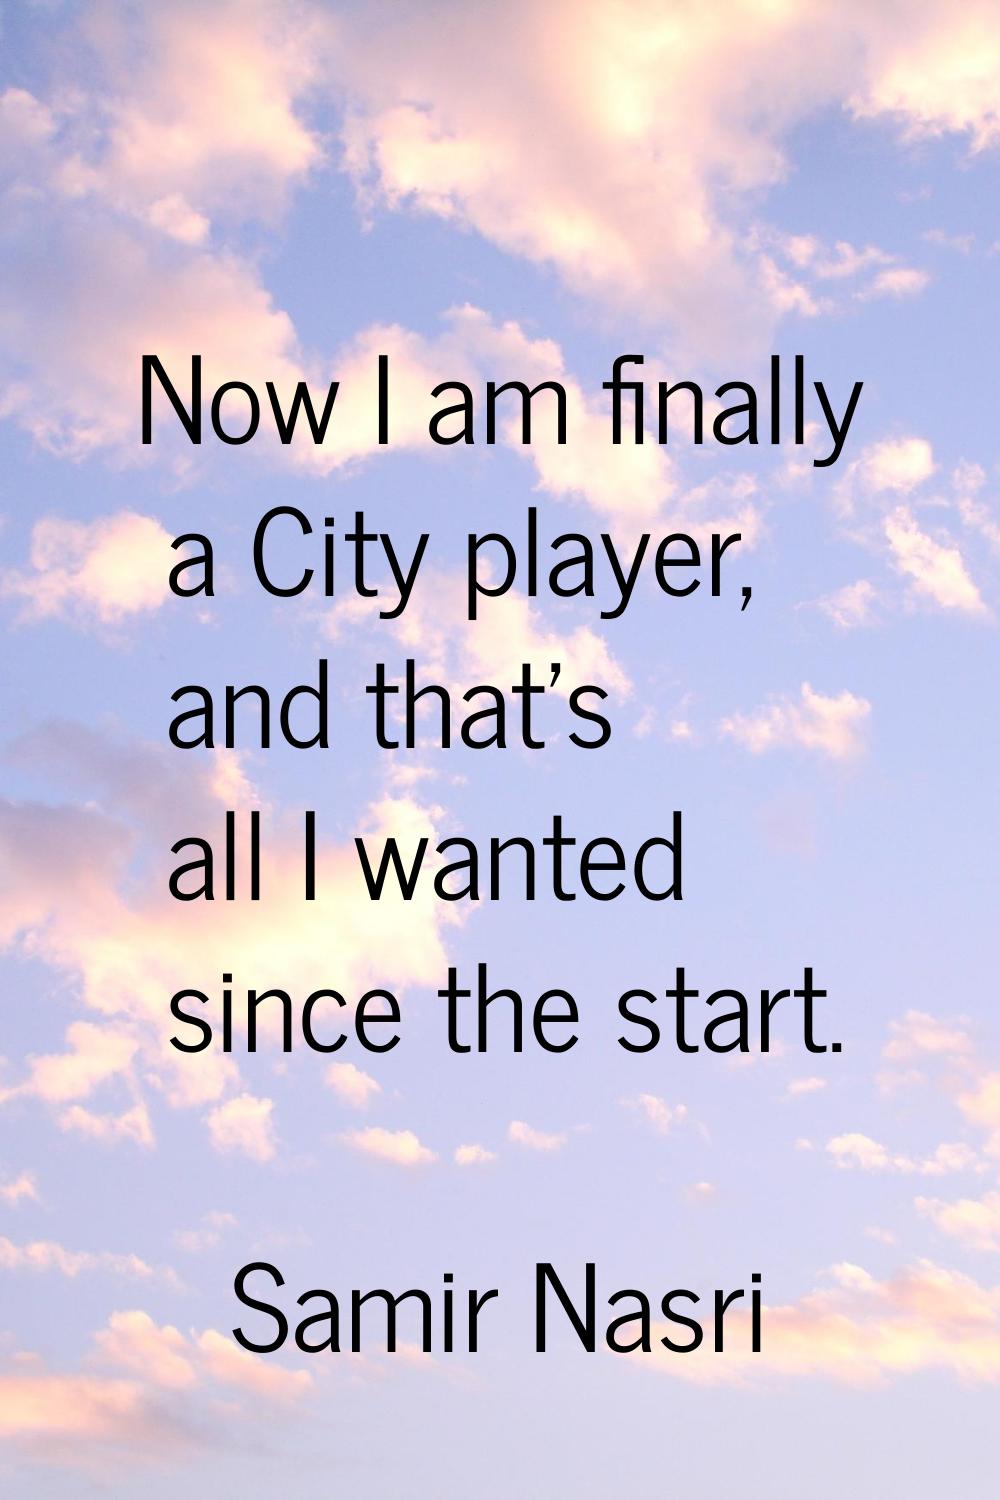 Now I am finally a City player, and that's all I wanted since the start.